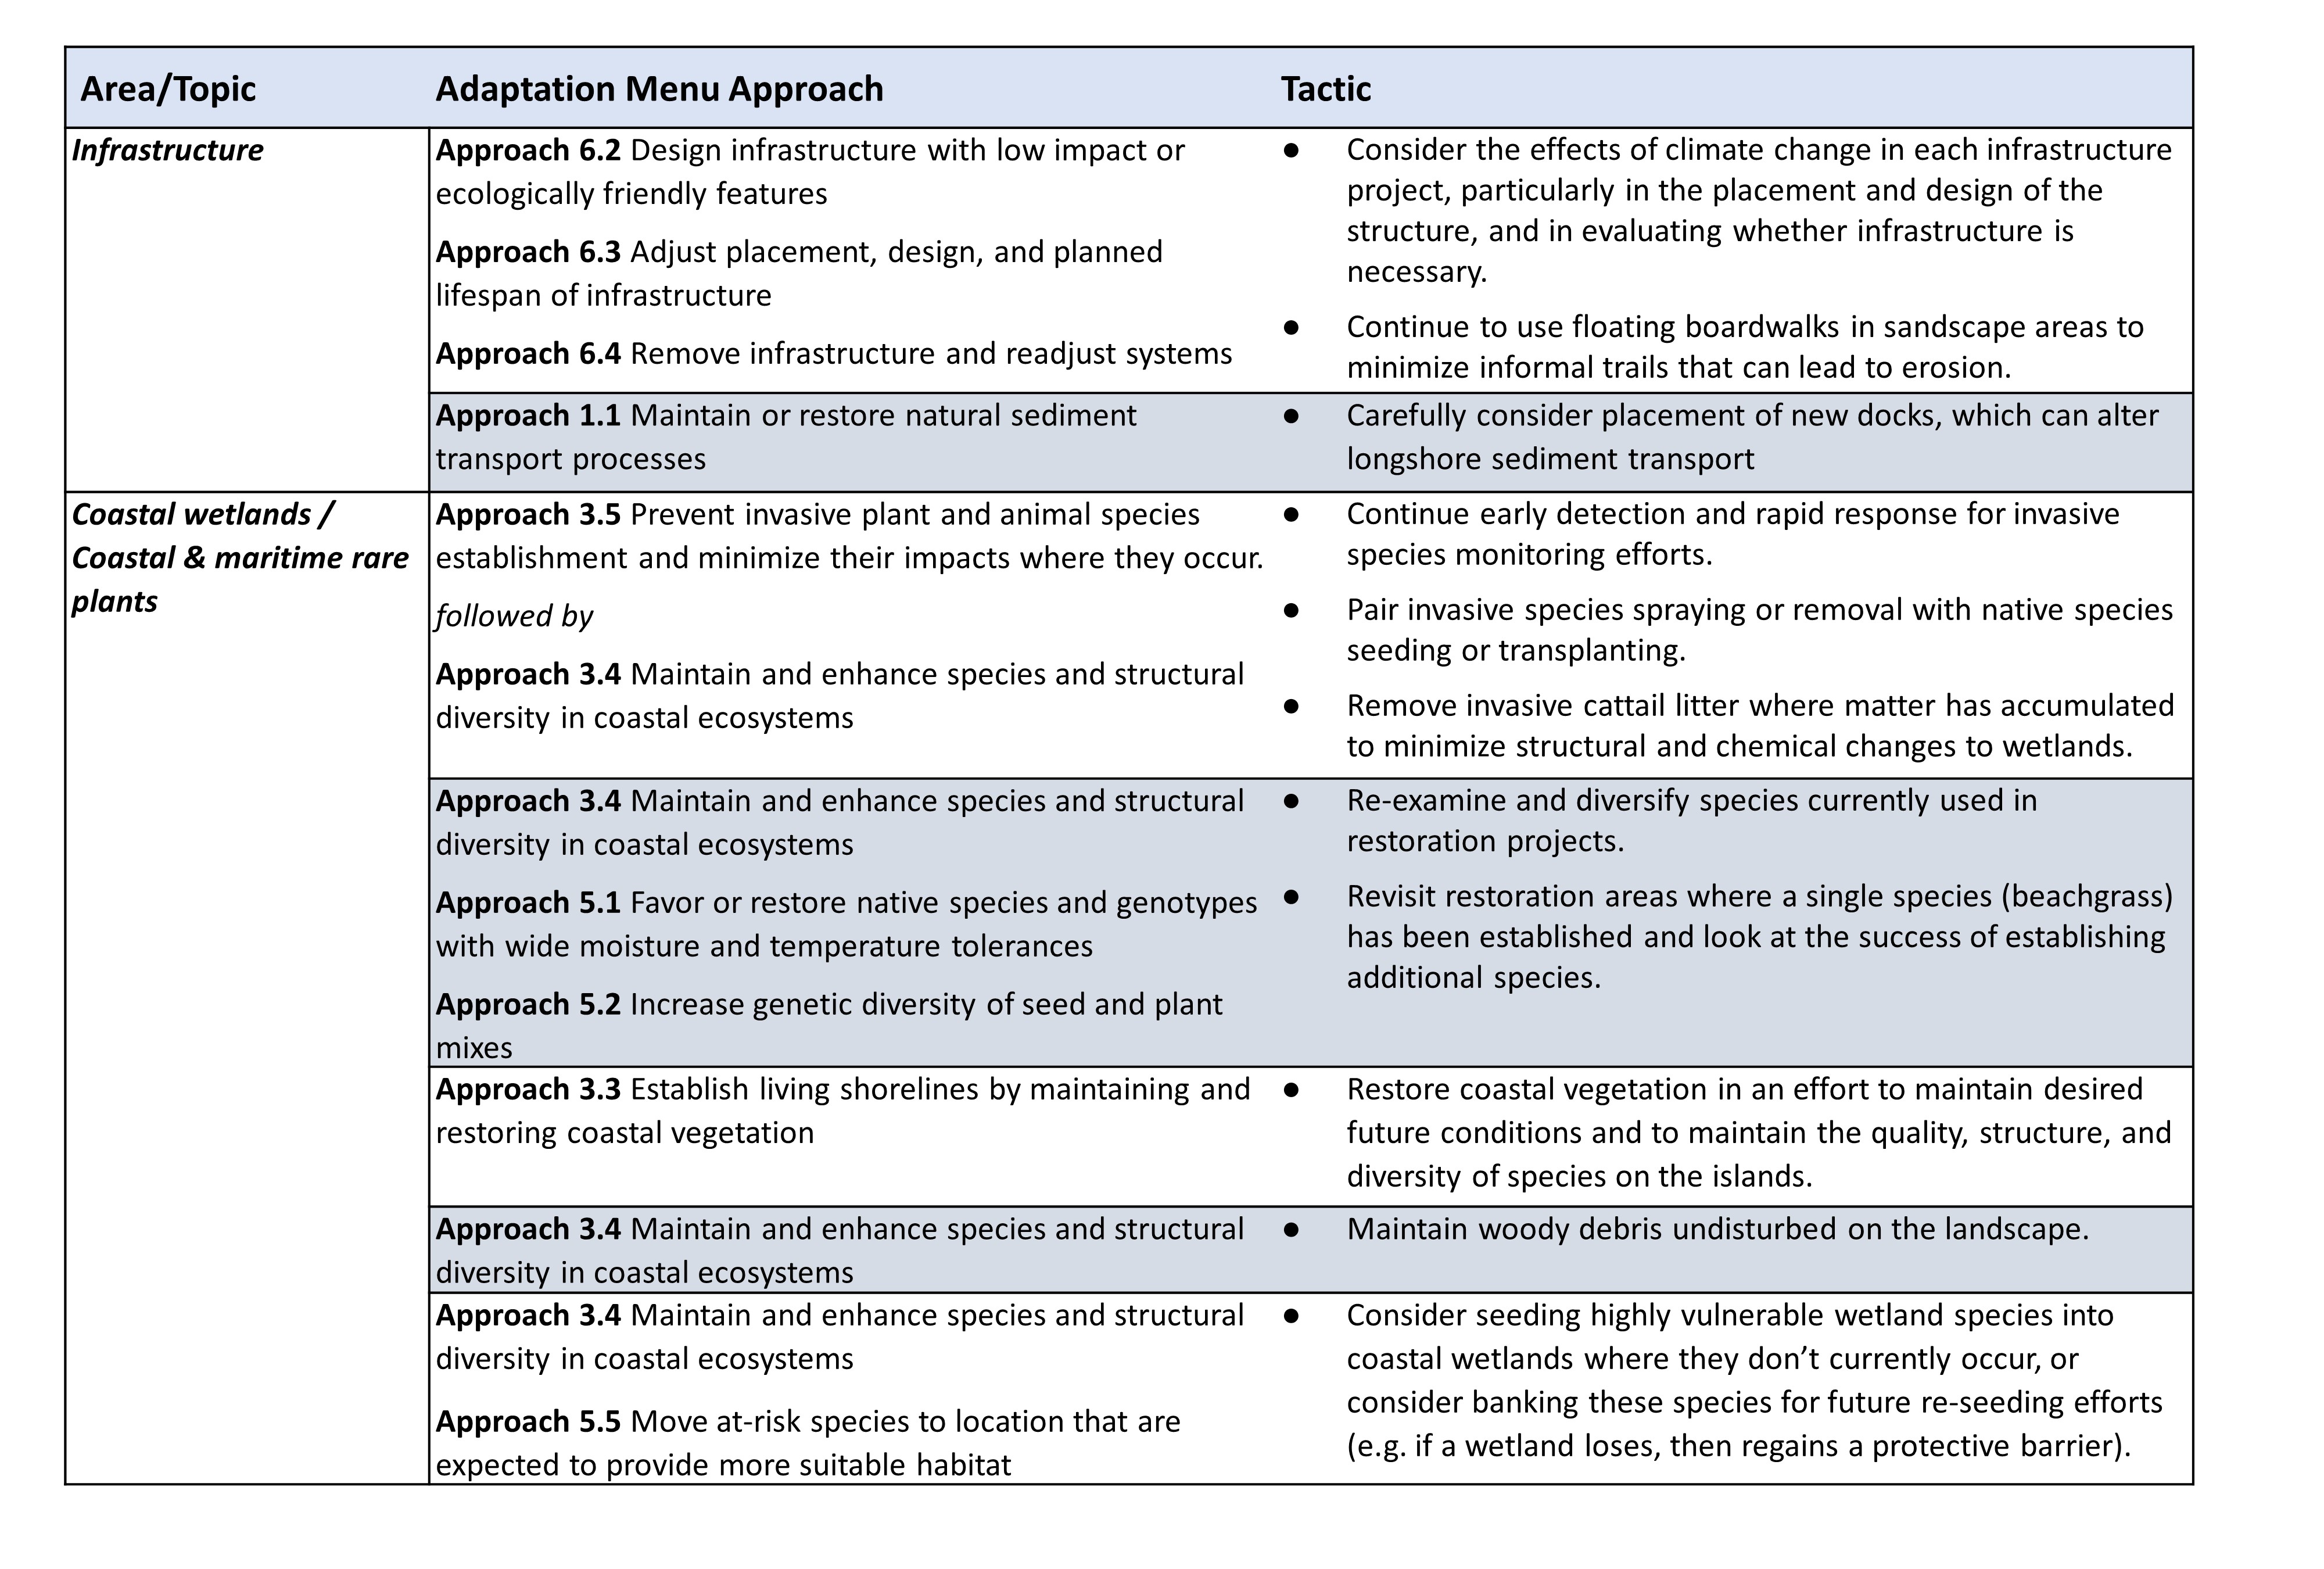 Table outlining adaptation approaches and tactics